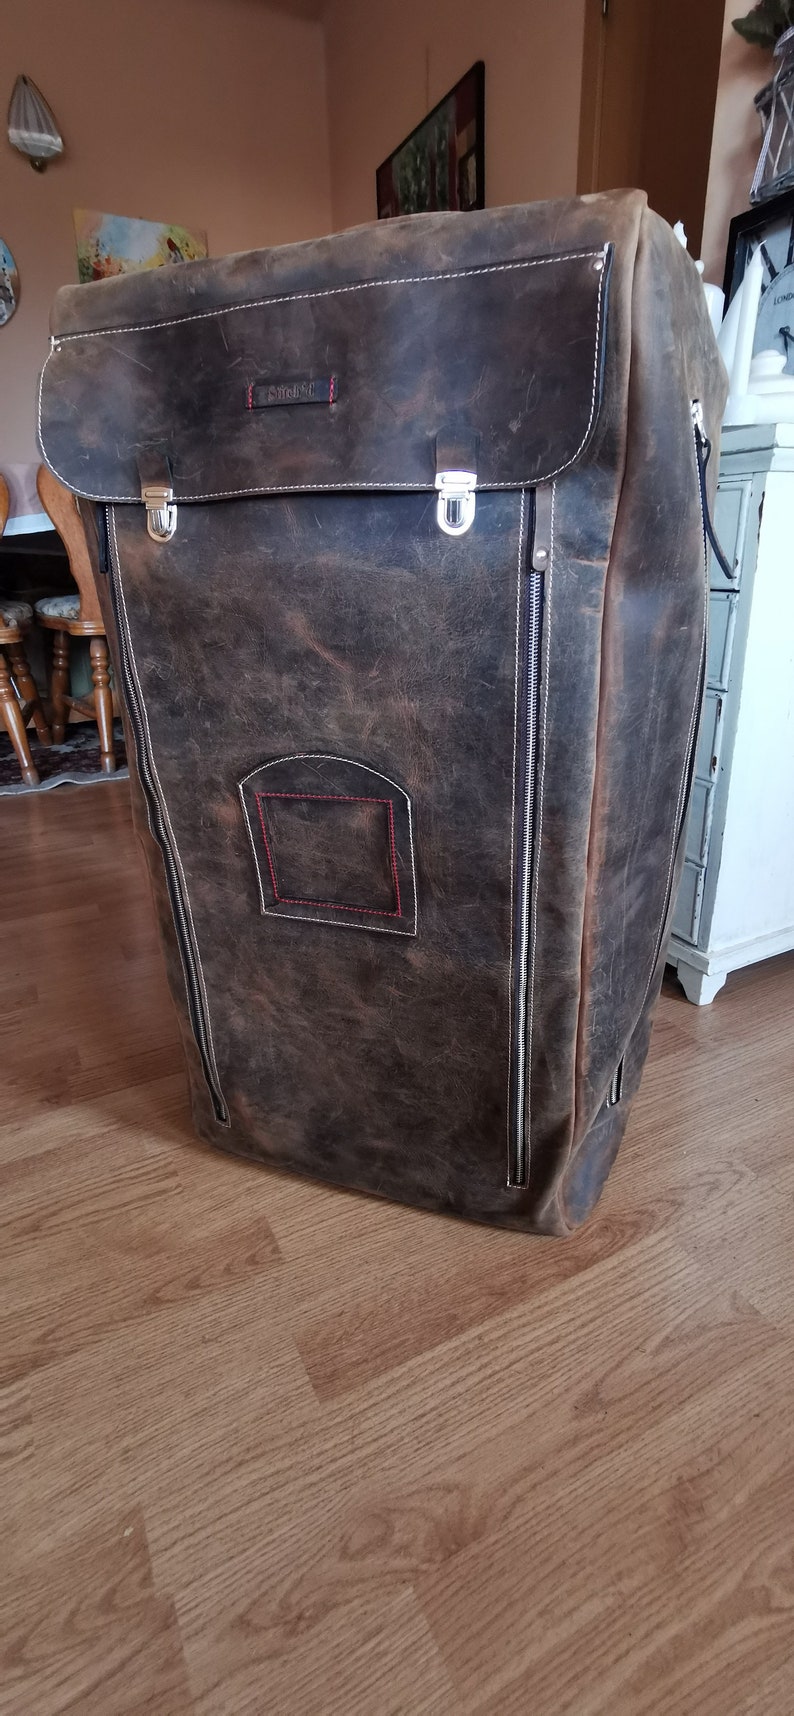 Large Family Leather Luggage, Handmade Leather Trolley Bag, Unique Design Stitch'd Leather Goods,Travel Leather Bag, Rolling Luggage image 3